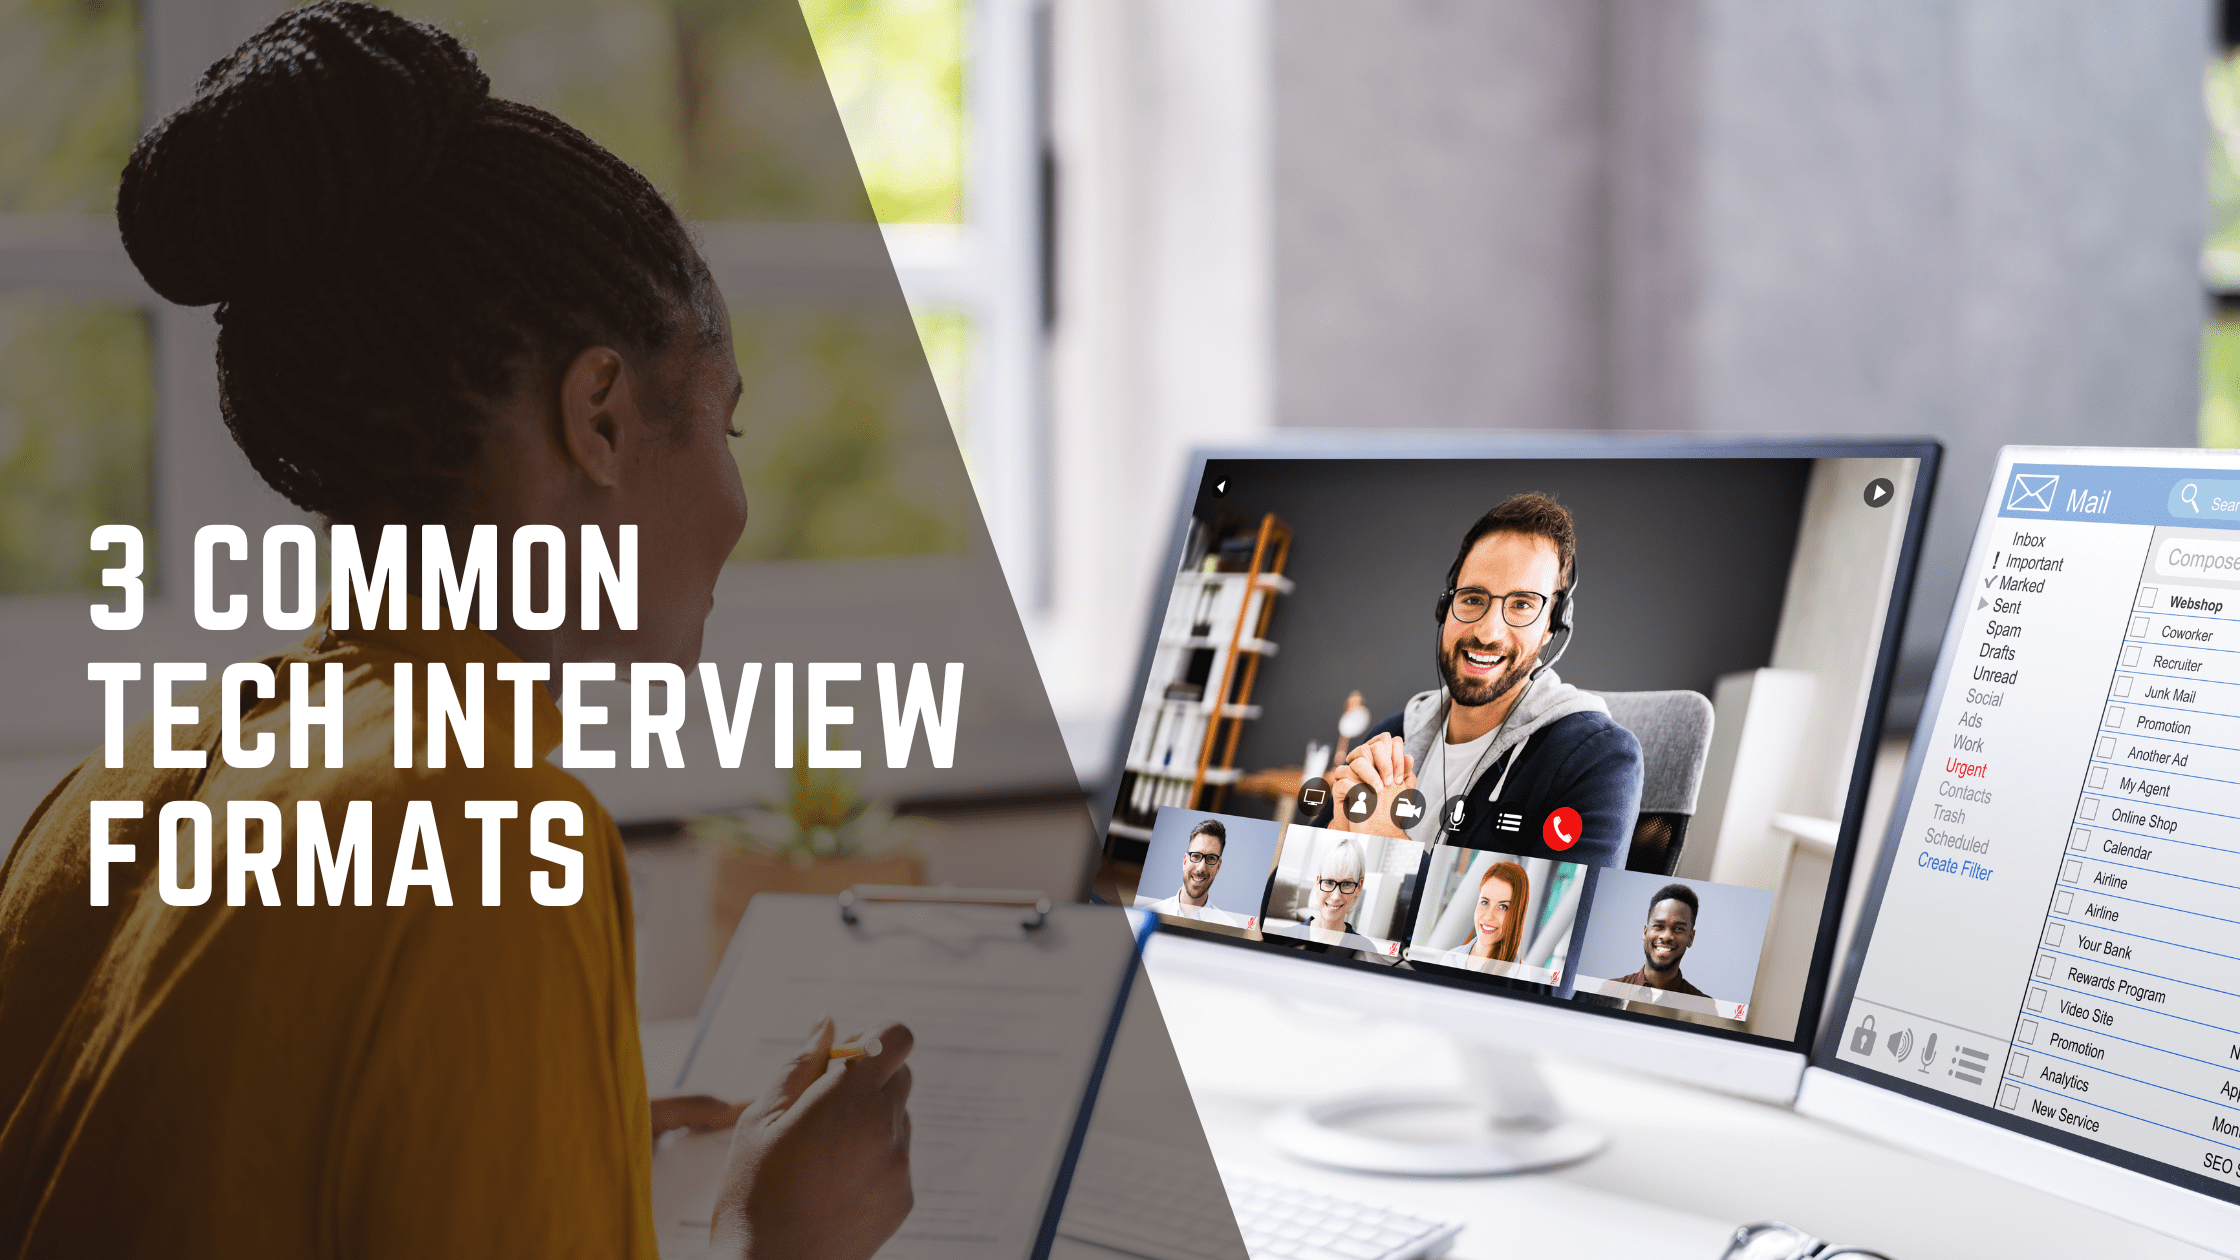 3 common tech interview formats, or how to test developers